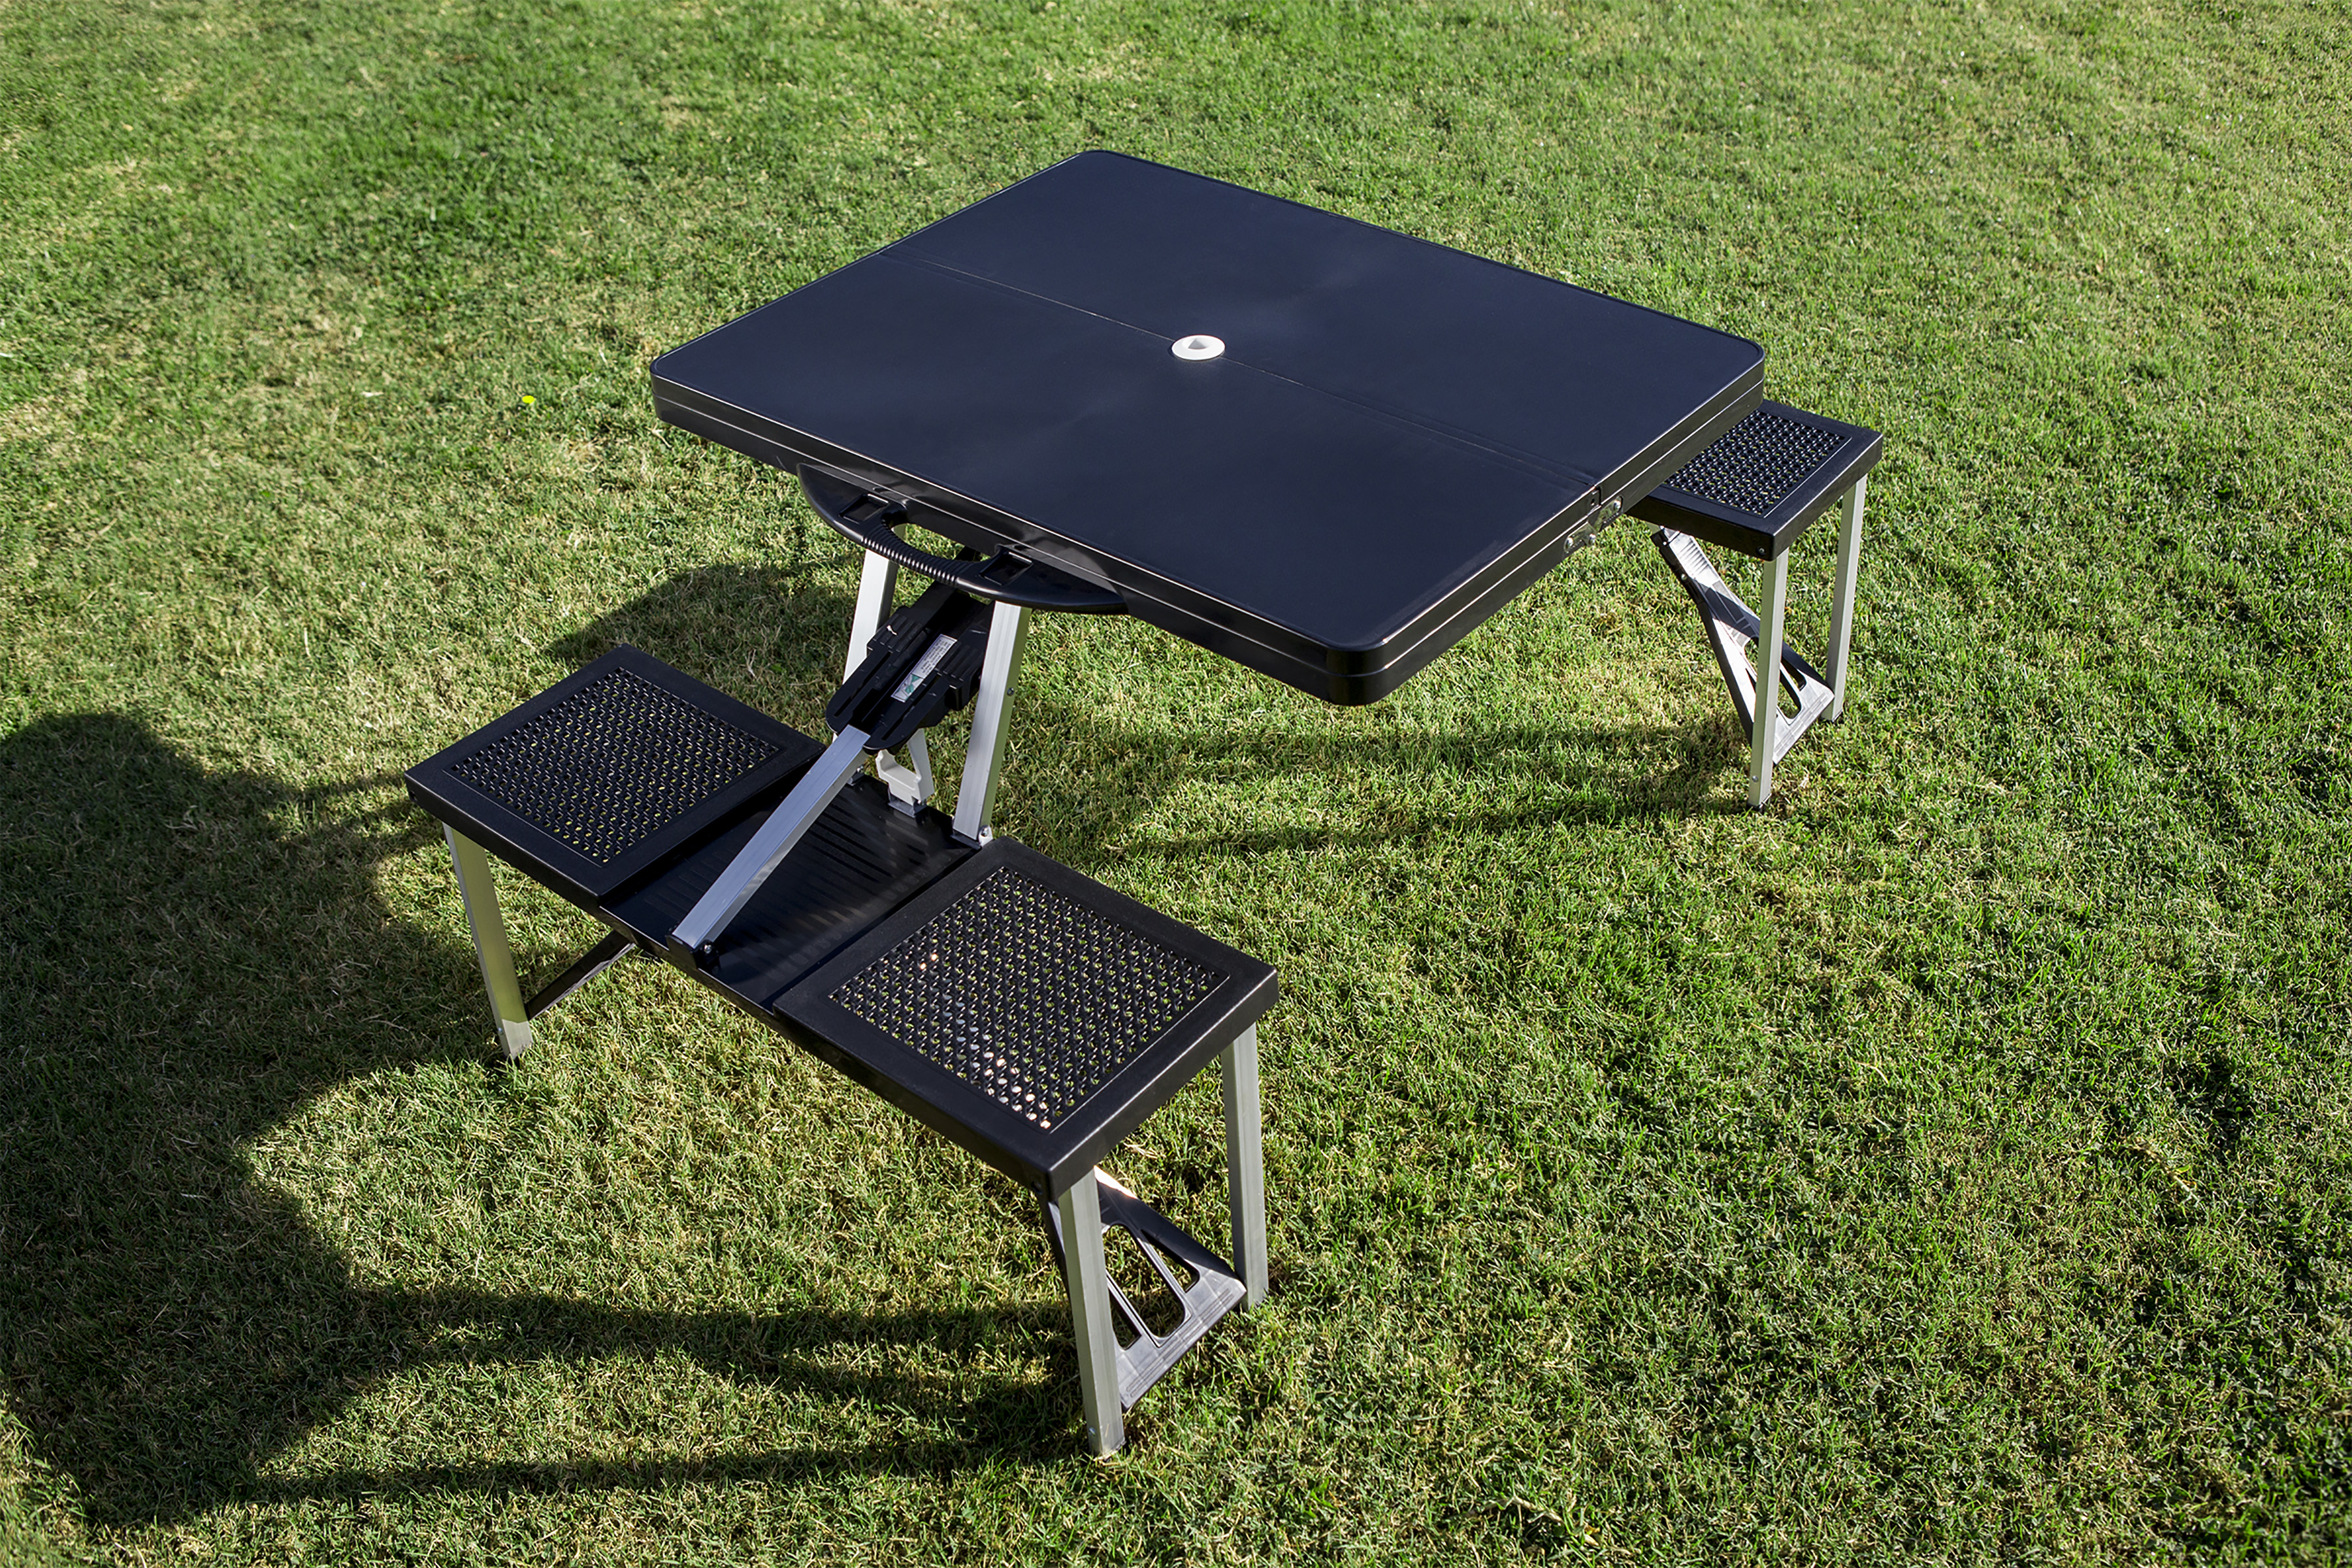 Wyoming Cowboys - Picnic Table Portable Folding Table with Seats